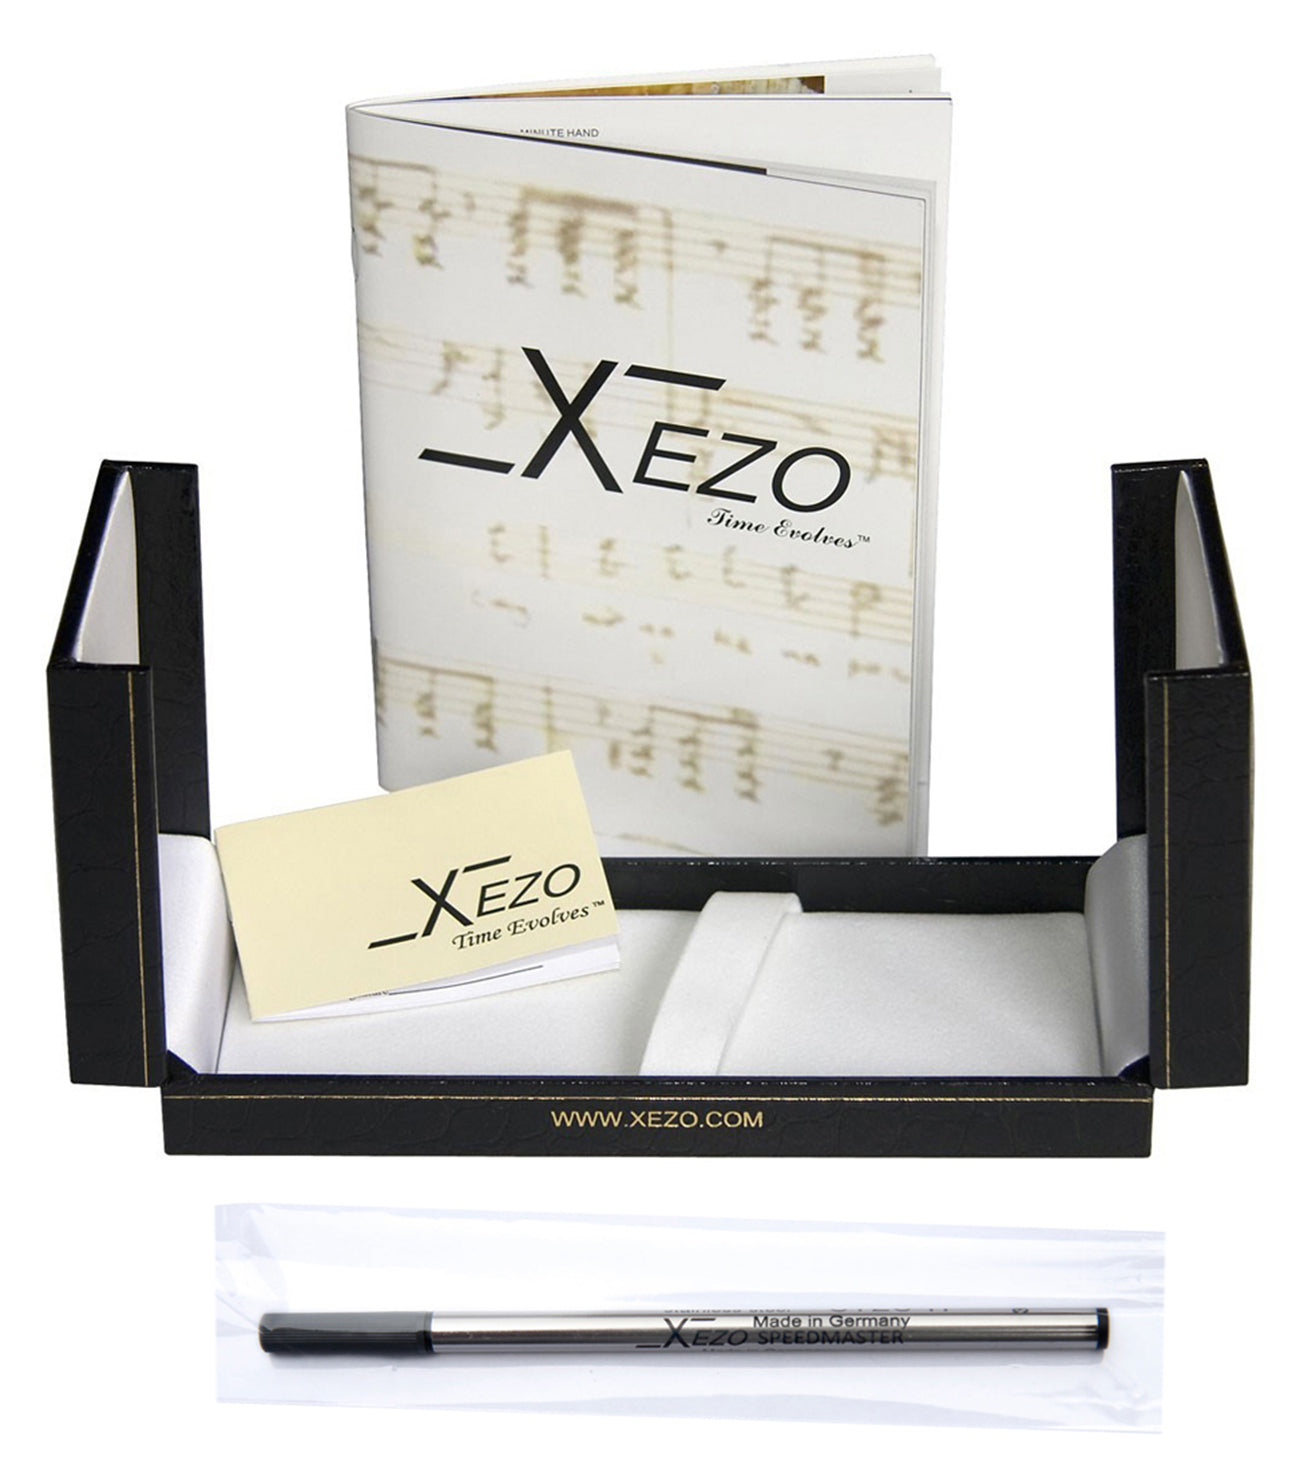 Xezo - Black gift box, certificate, manual, and the gel ink cartridge of the Incognito Zinc R-1 rollerball pen